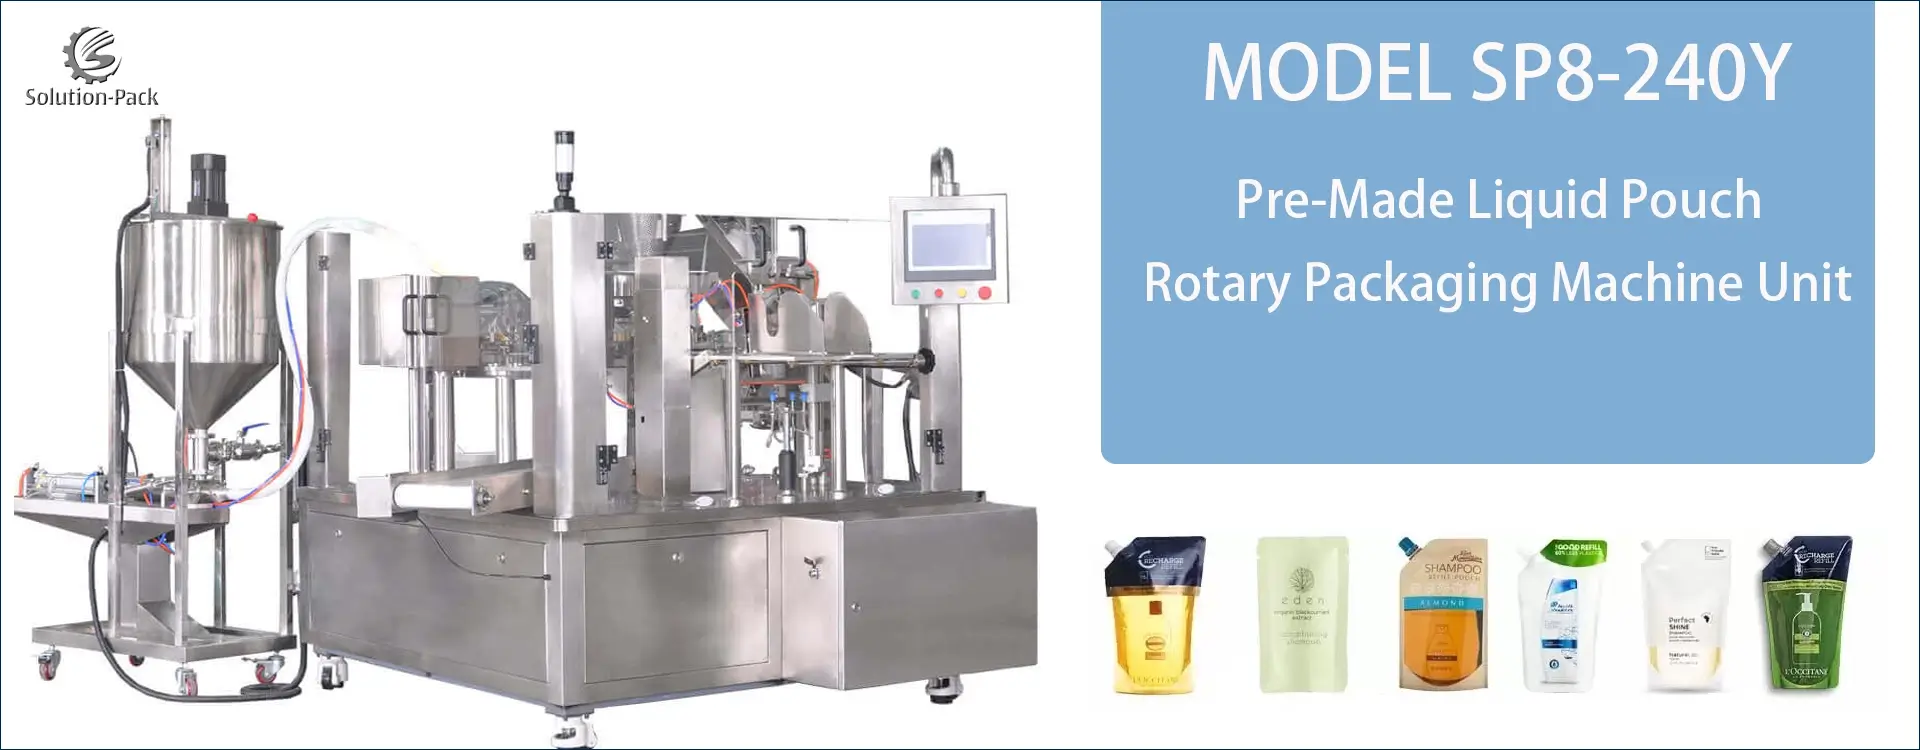 Model SP8-240Y Automatic Liquid Pre-Made Pouch Rotary Packaging Machine Solution Heading Banner Picture | Solution-Pack